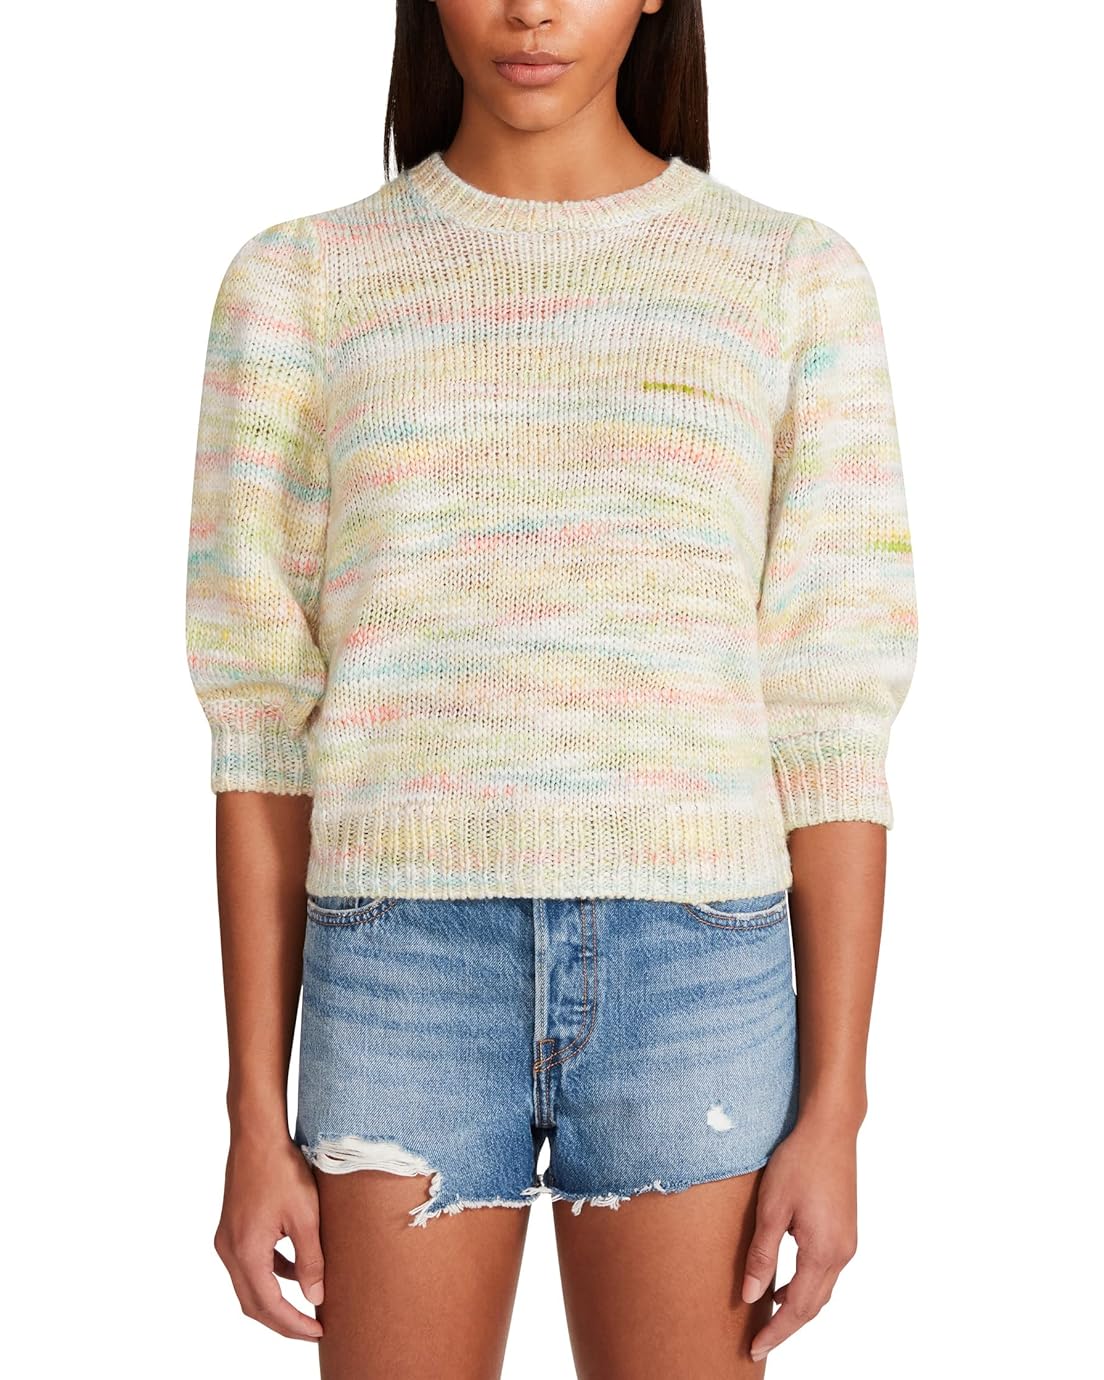 Steve Madden Sweet Tooth Sweater